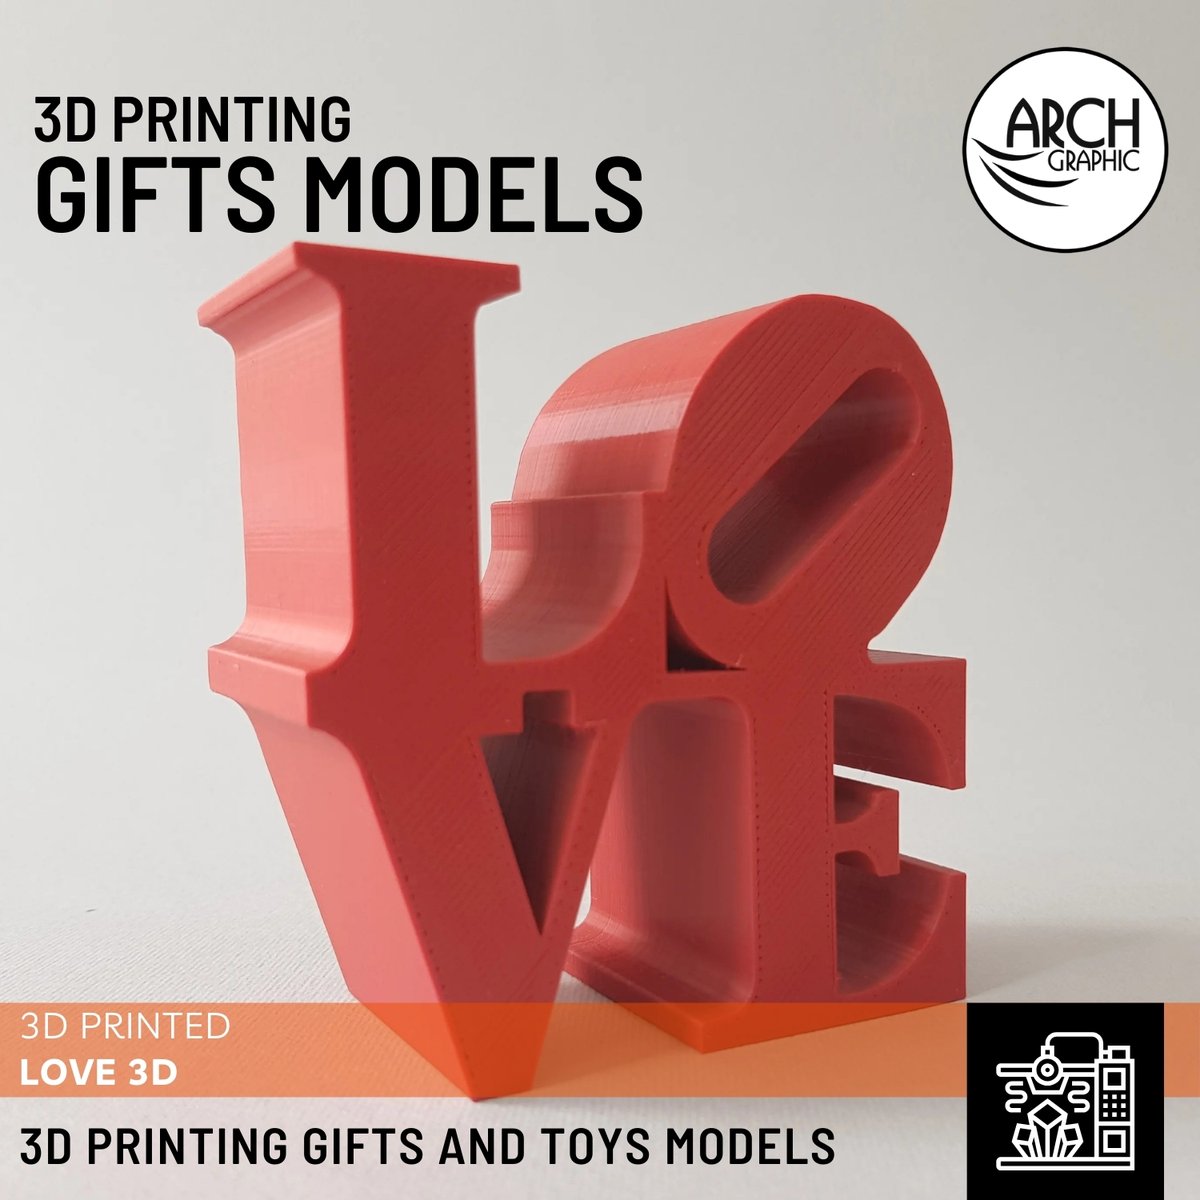 🌟 Find Perfect 3D Printed Gifts Models in UAE! 🎁💖 Discover the Charm of 3D Printed Love Art by ARCH GRAPHIC. Visit: arch-graphic.com #CreativeGifts #UniqueDesigns #CustomGifts #LoveArt #RomanticGifts #HandmadeGifts #UAEArt #DubaiDesign #3Dprint #3DprintinginUAE ✨🏙️🎨